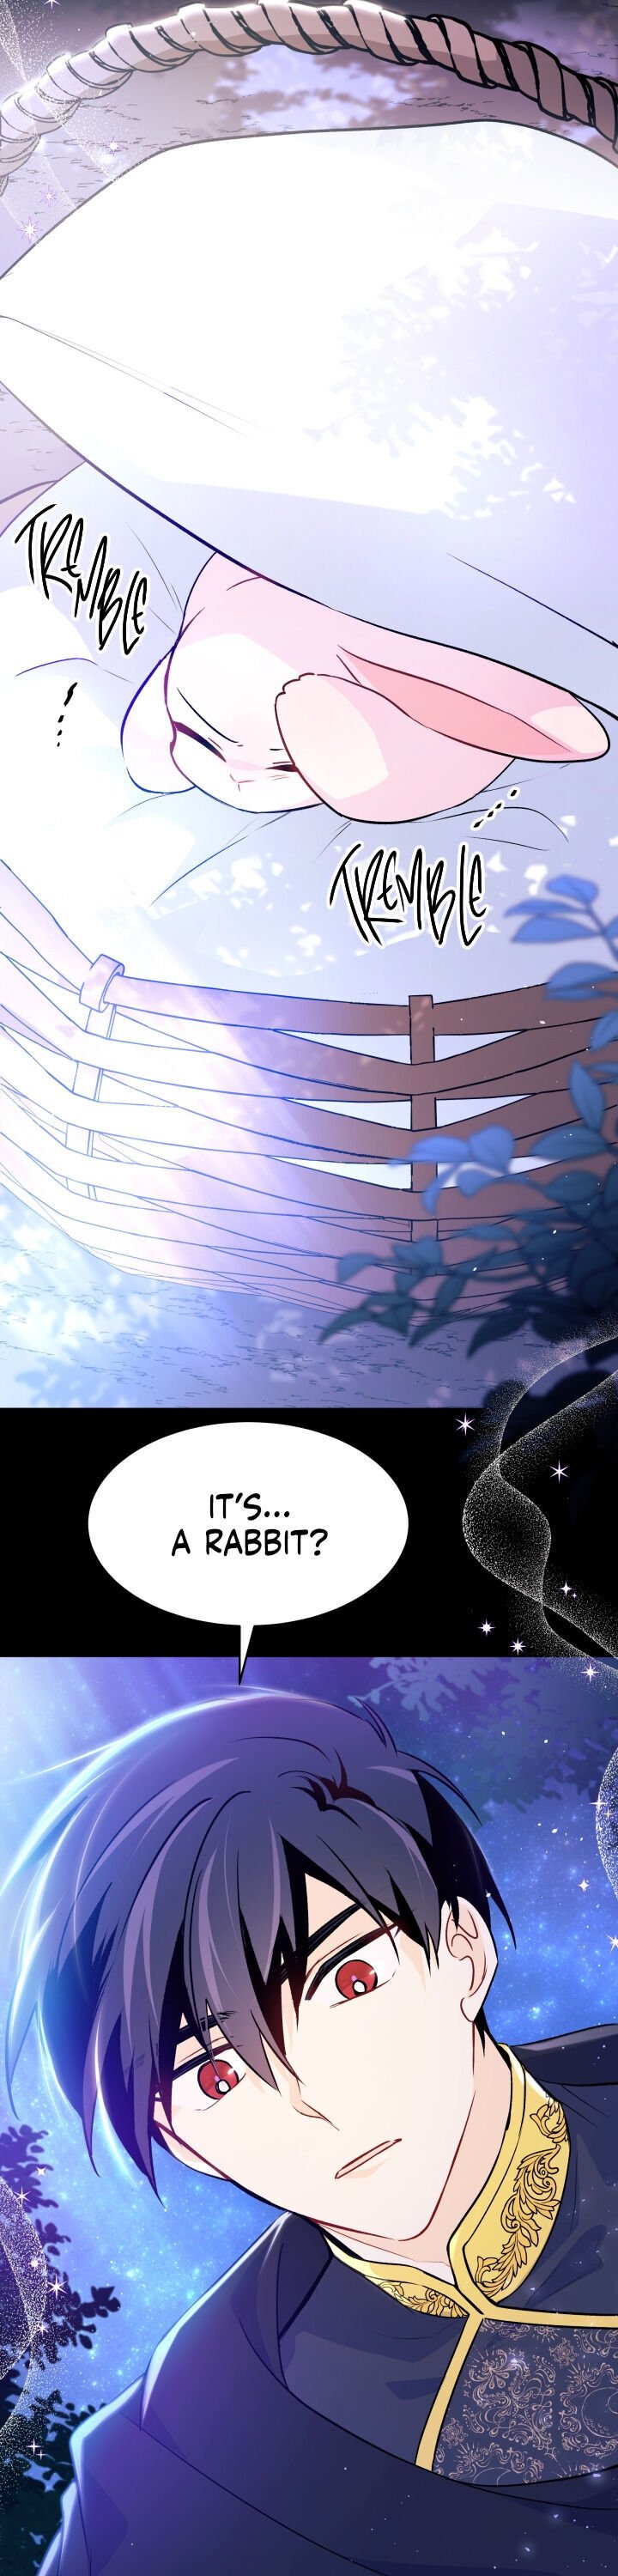 the-symbiotic-relationship-between-a-rabbit-and-a-black-panther-chap-29-15